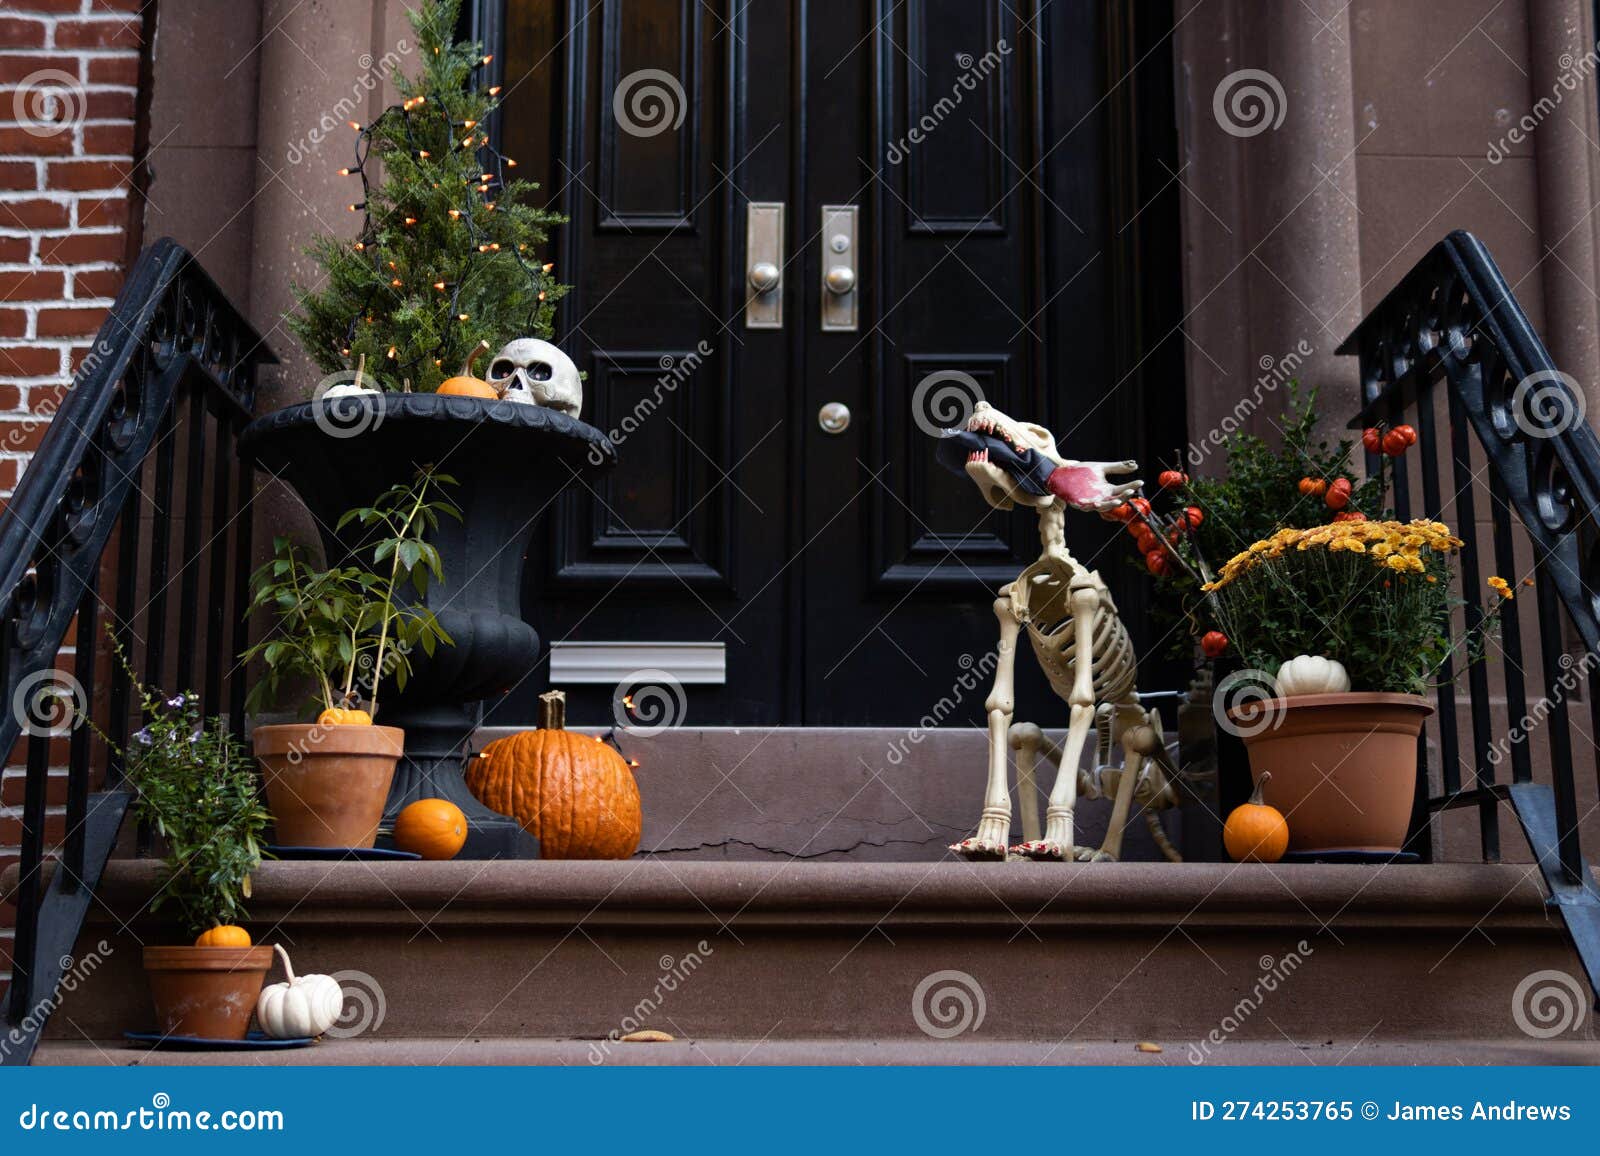 Halloween Decorations and Pumpkins on Entrance Stairs To a ...